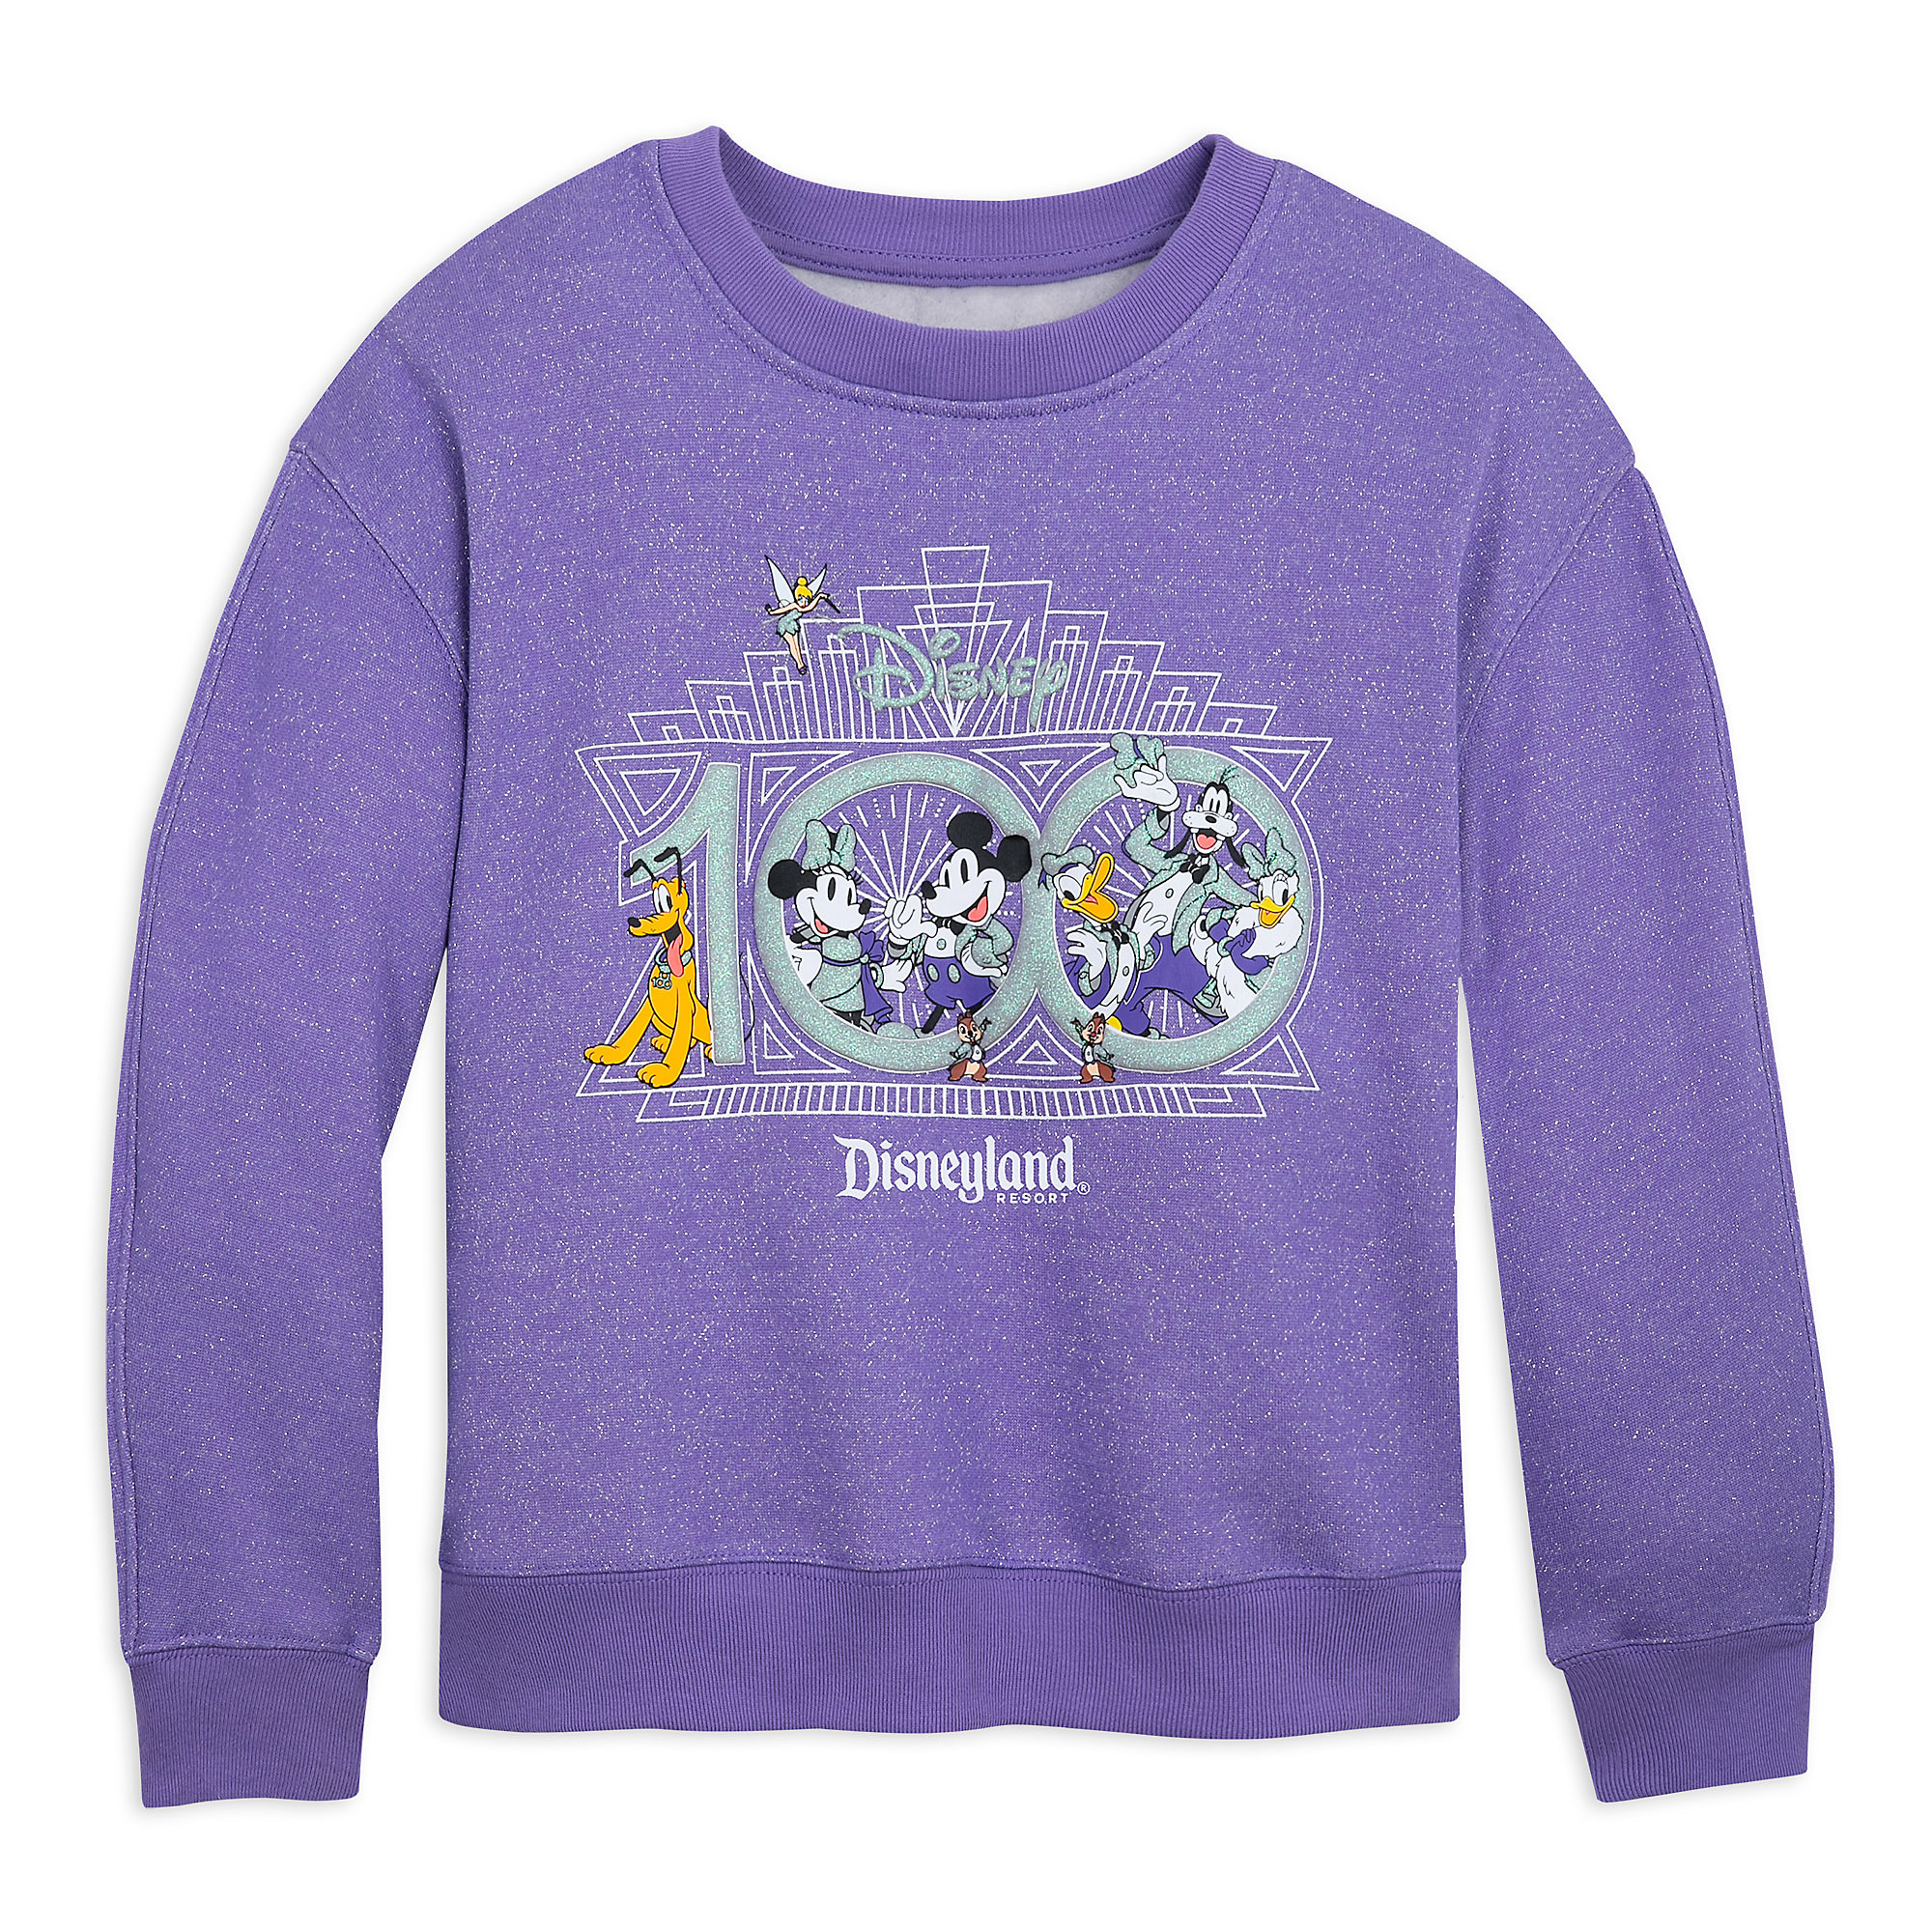 A crewneck sweatshirt with the Disney 100 logo and a bunch of the characters dressed up